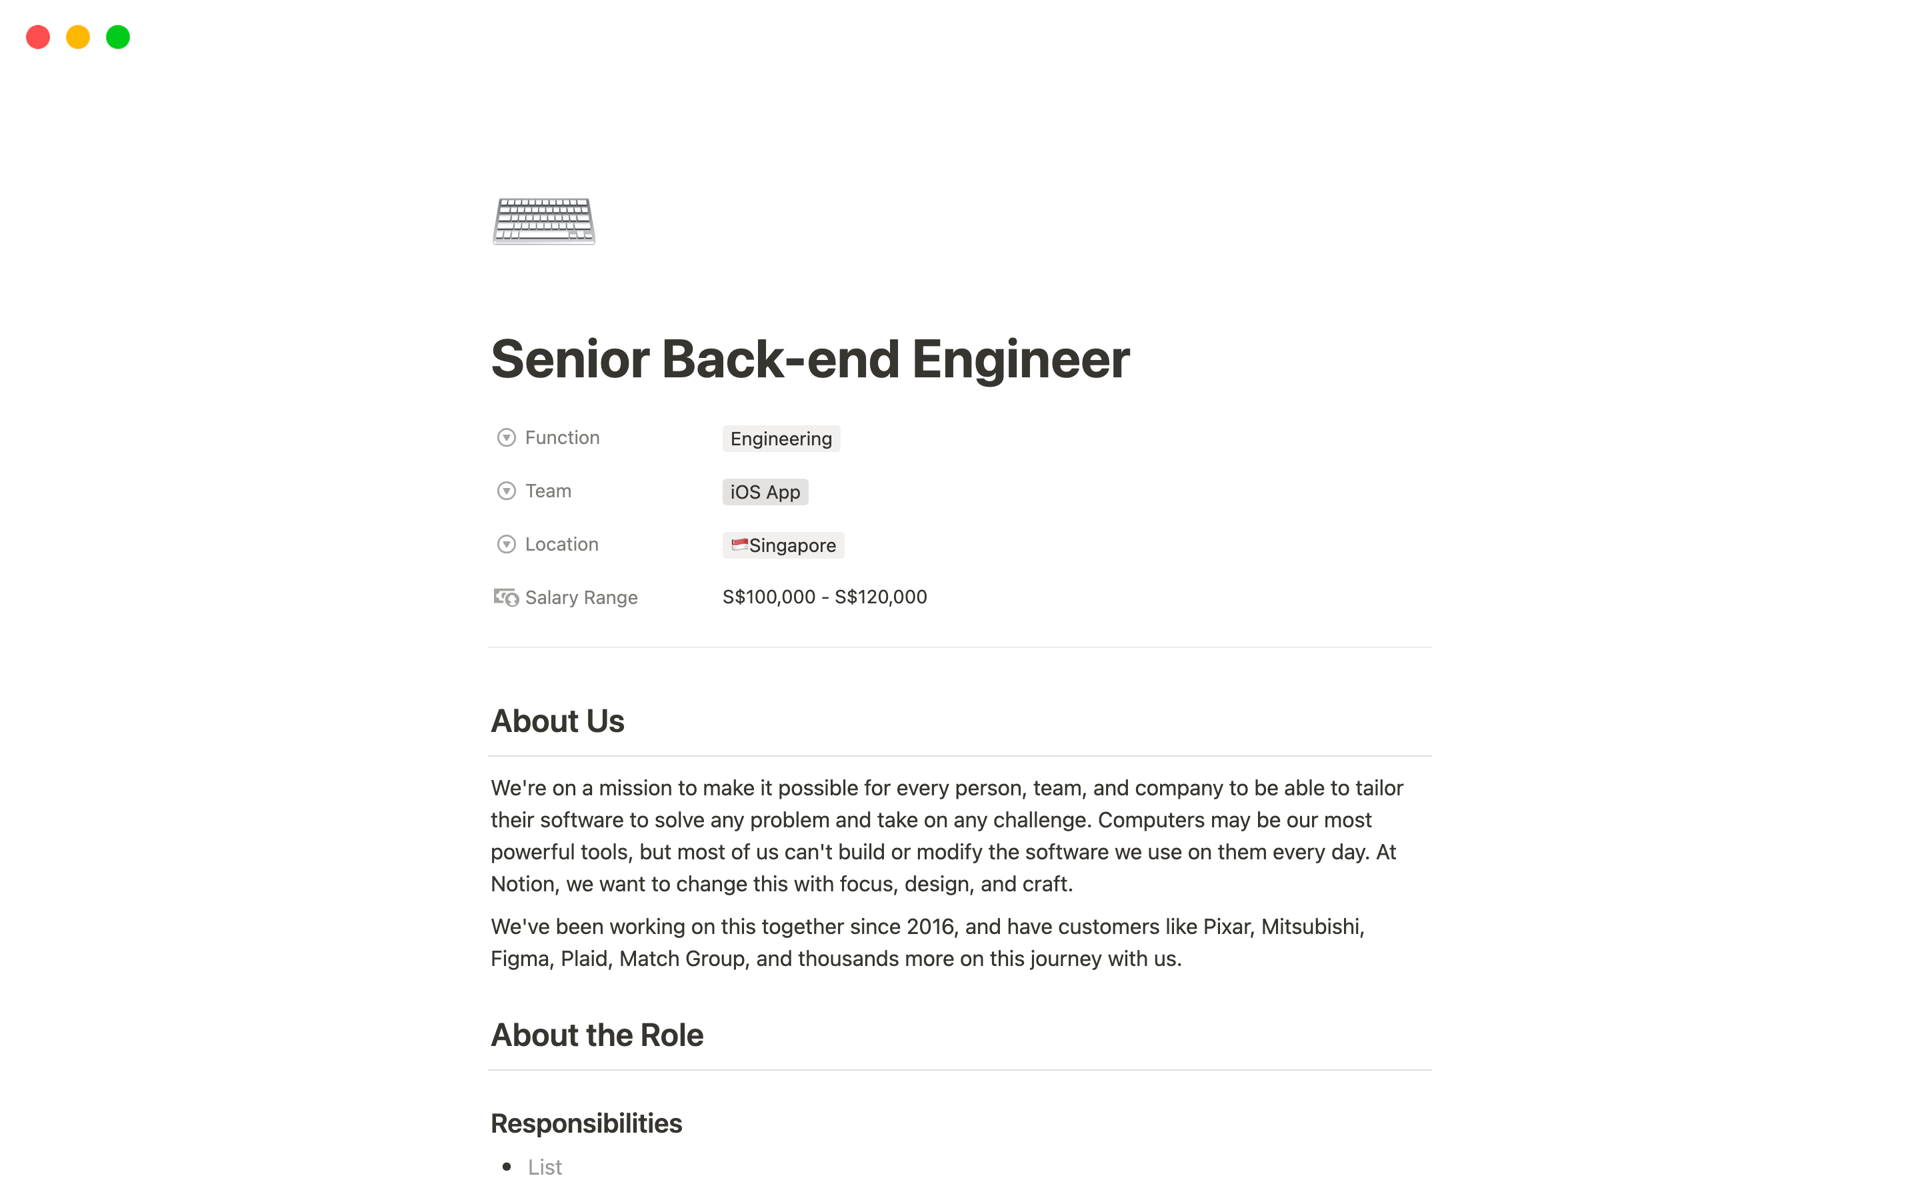 A public careers site and job board.